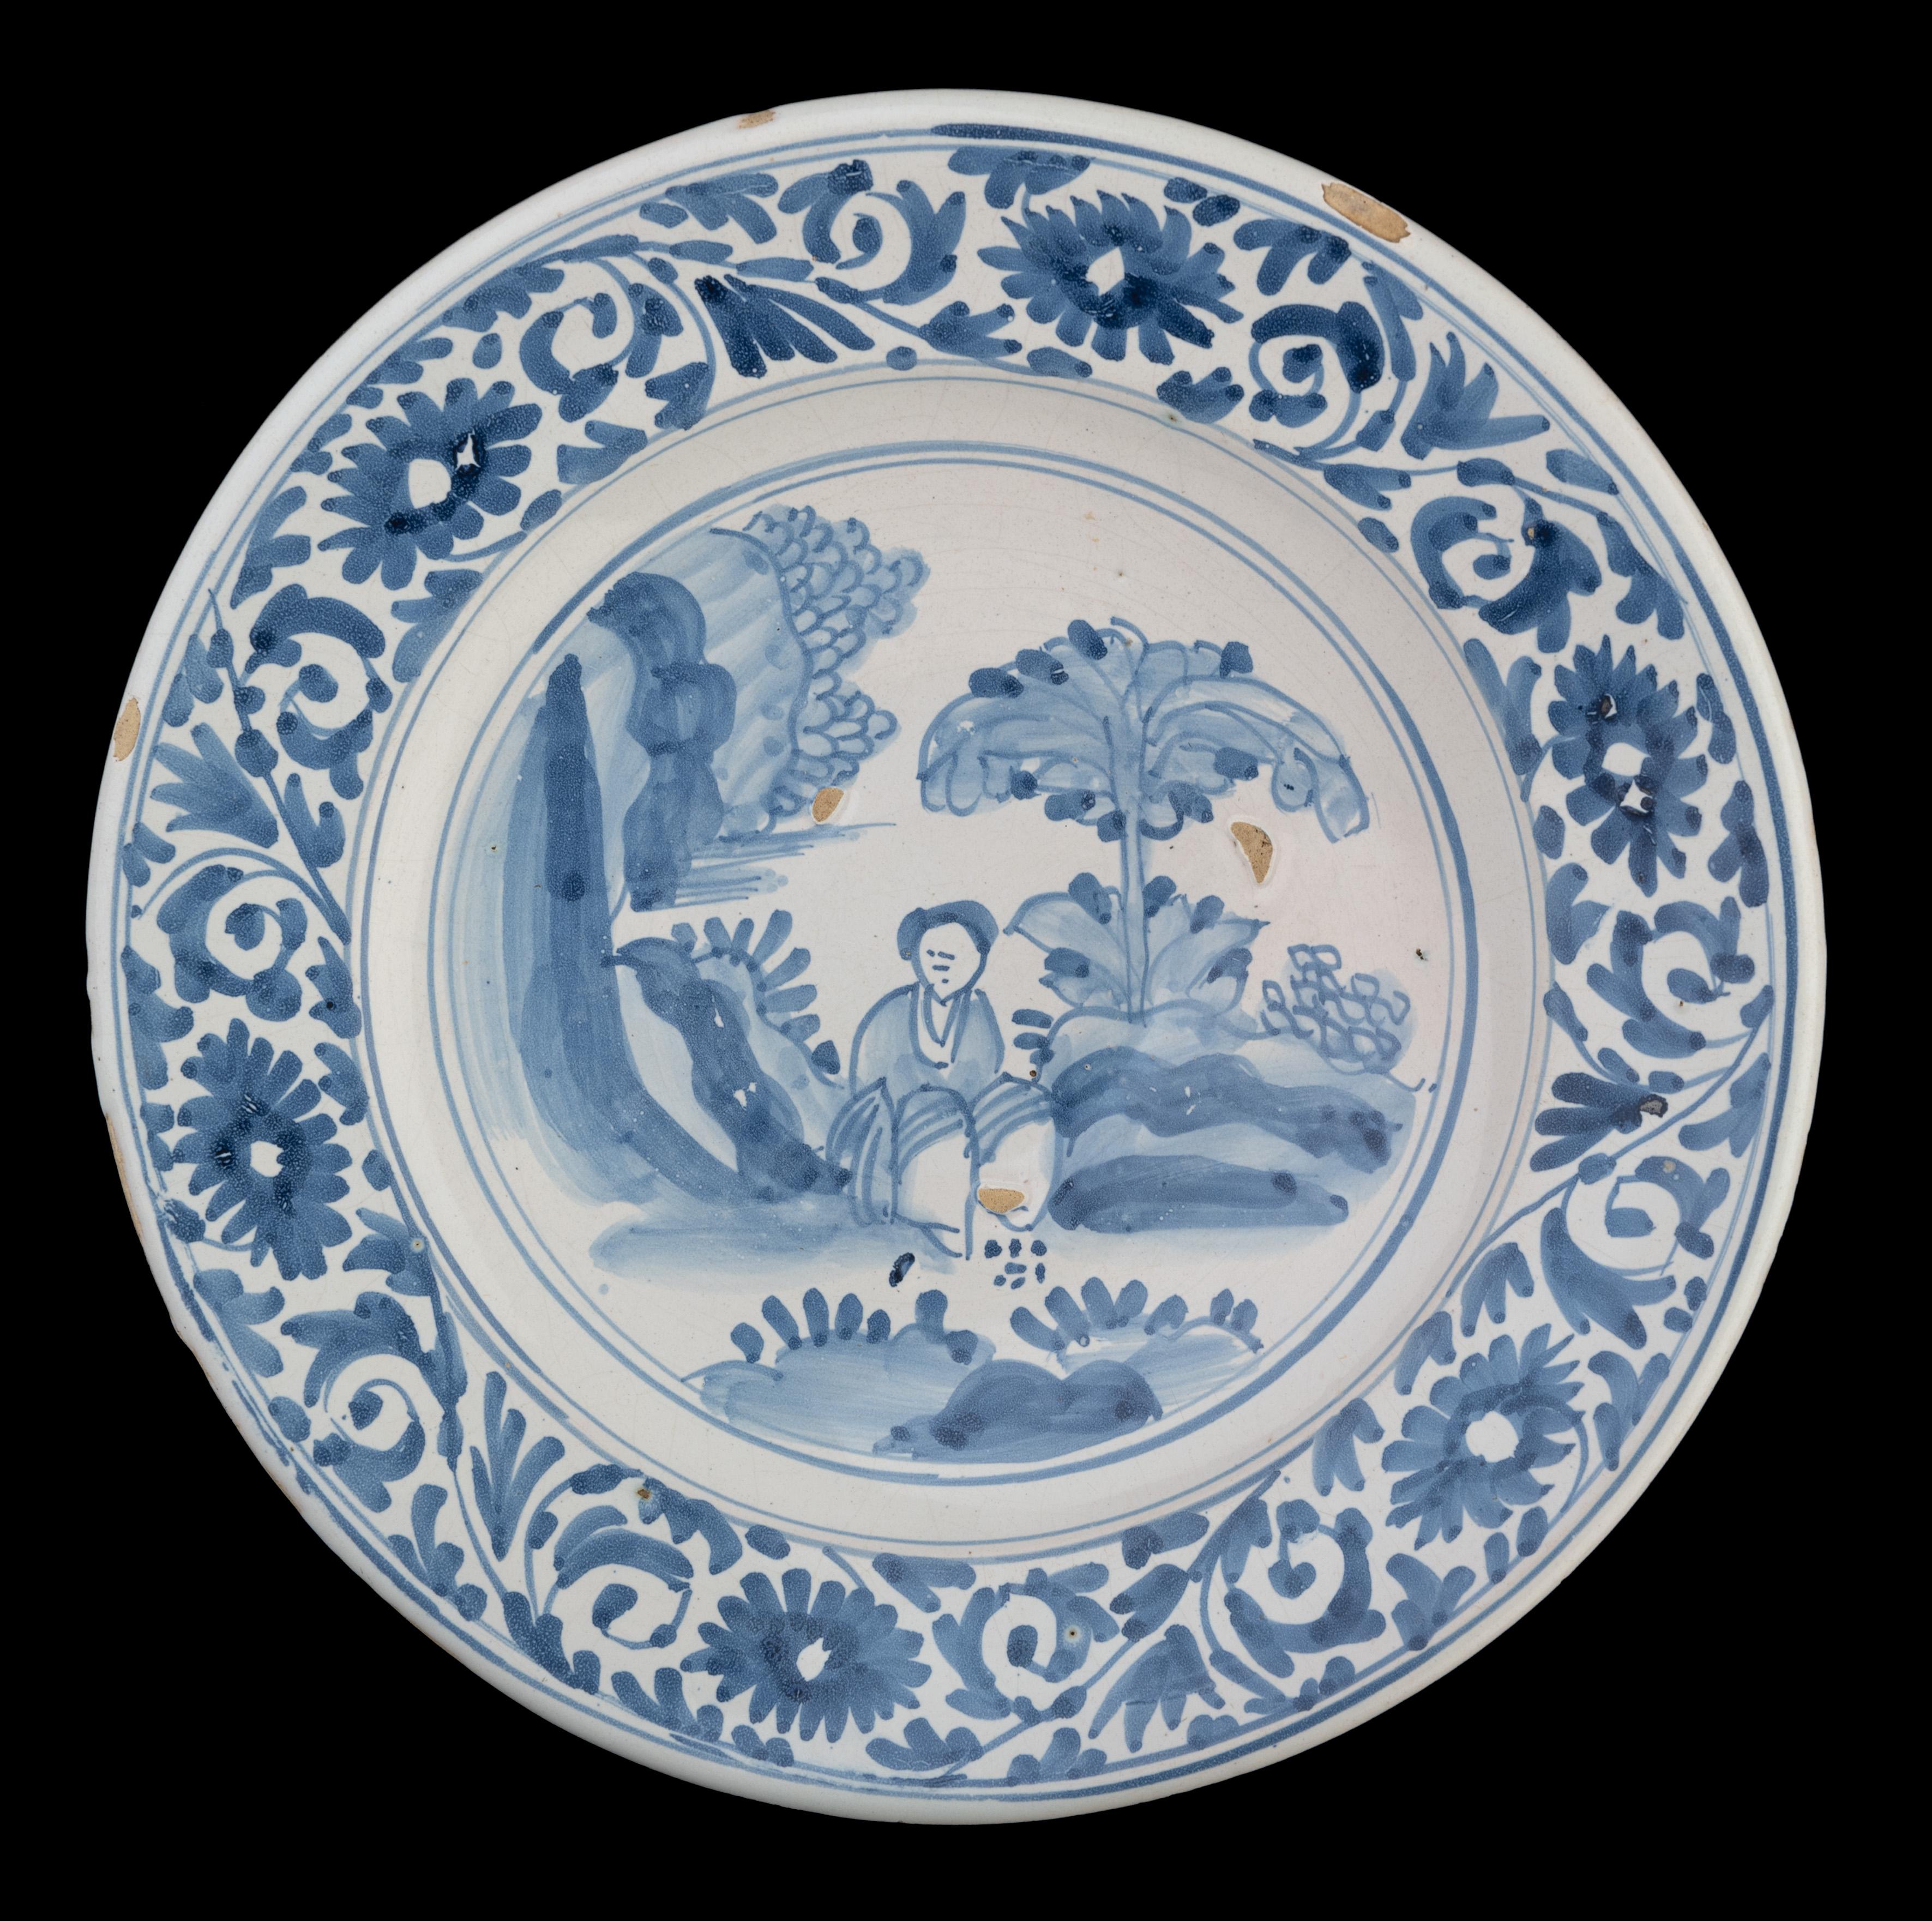 Large blue and white chinoiserie dish. The Netherlands, 1675-1700.

The blue and white dish has a wide-spreading flange and is painted in the centre with a sitting Chinese figure in an oriental landscape, within a double circle. The well is left